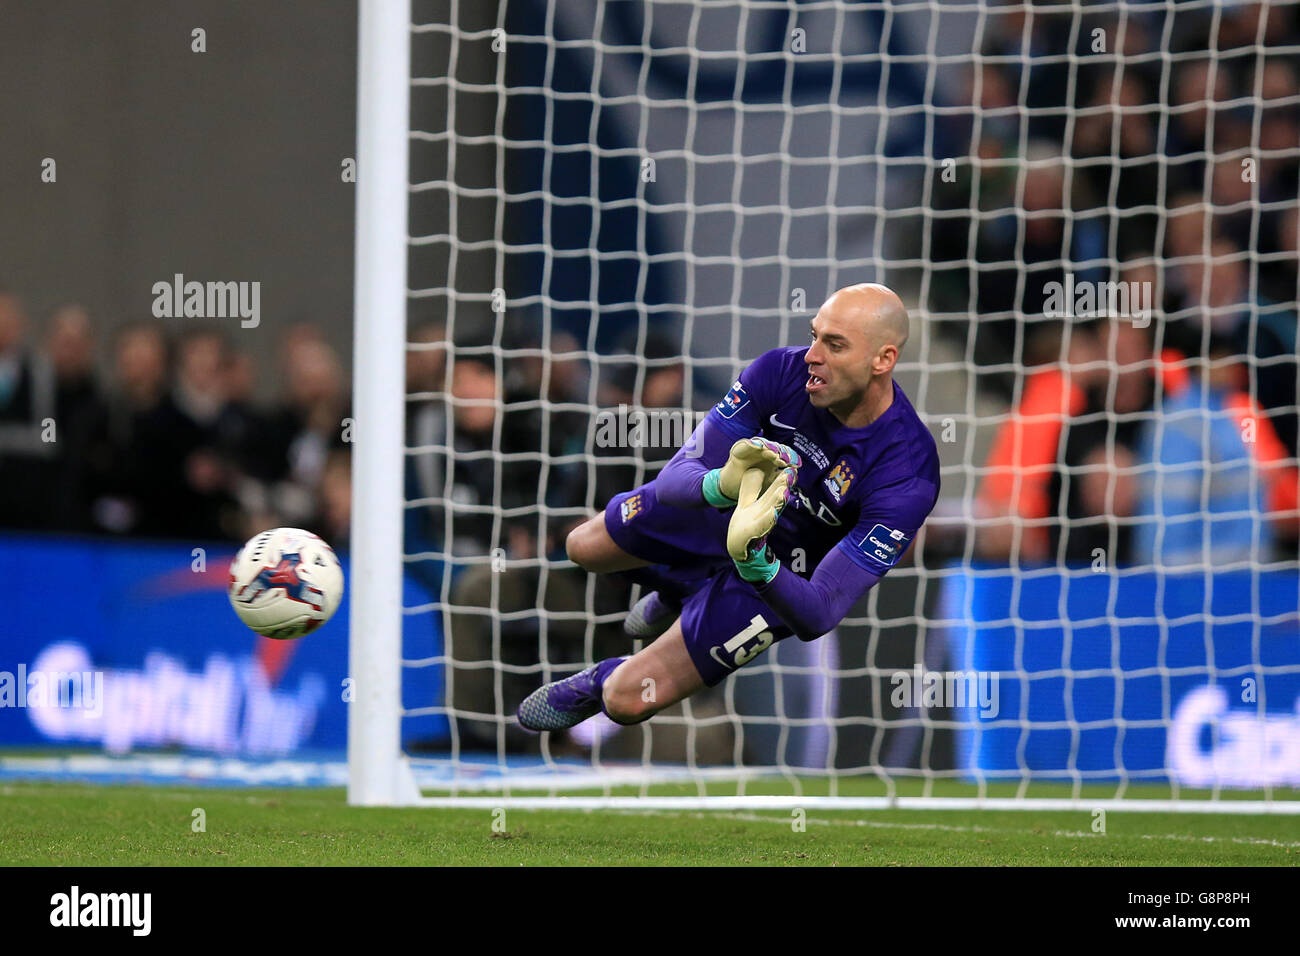 Manchester City goalkeeper Willy Caballero saves a penalty from Liverpool's Philippe Coutinho in the penalty shoot-out during the Capital One Cup final at Wembley Stadium, London. Stock Photo